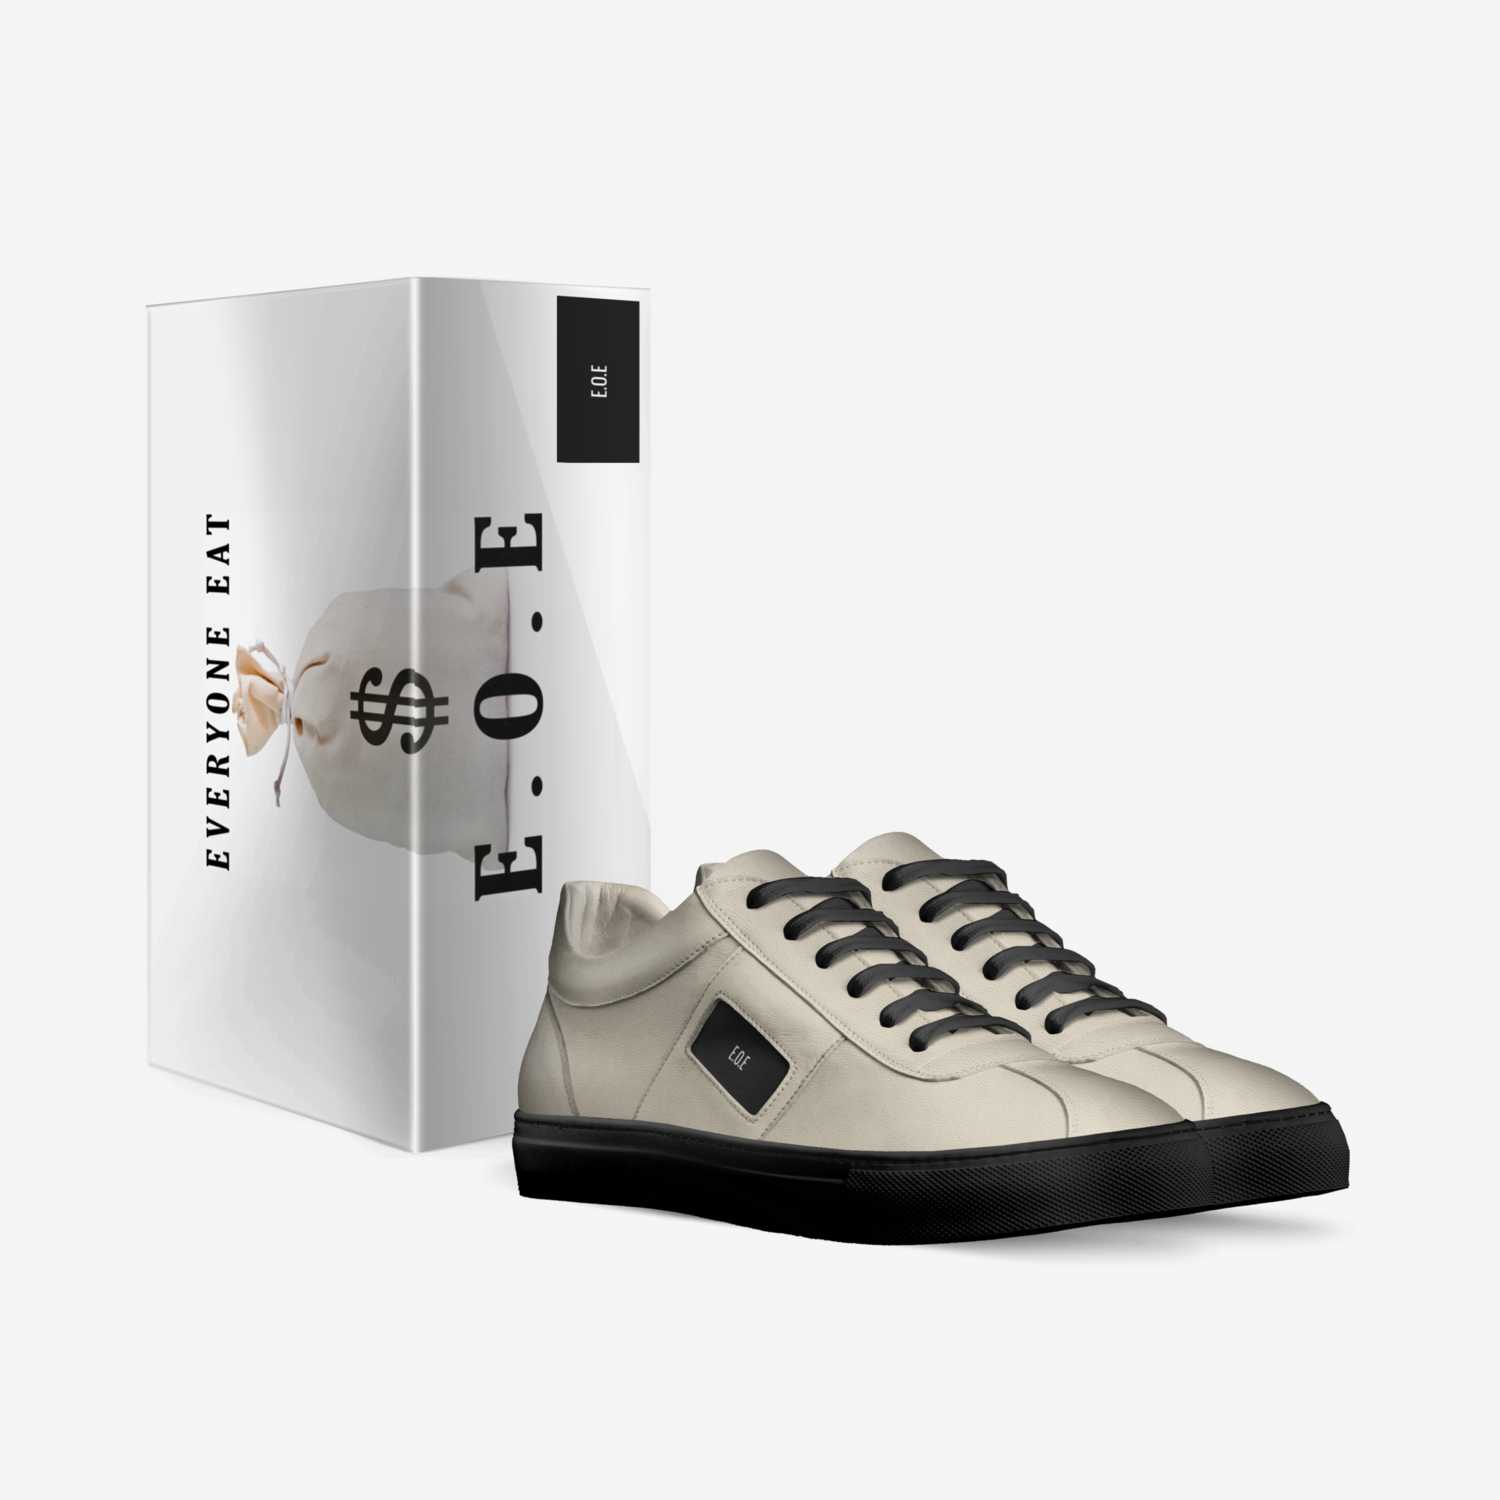 E.O.E custom made in Italy shoes by Hersh White | Box view